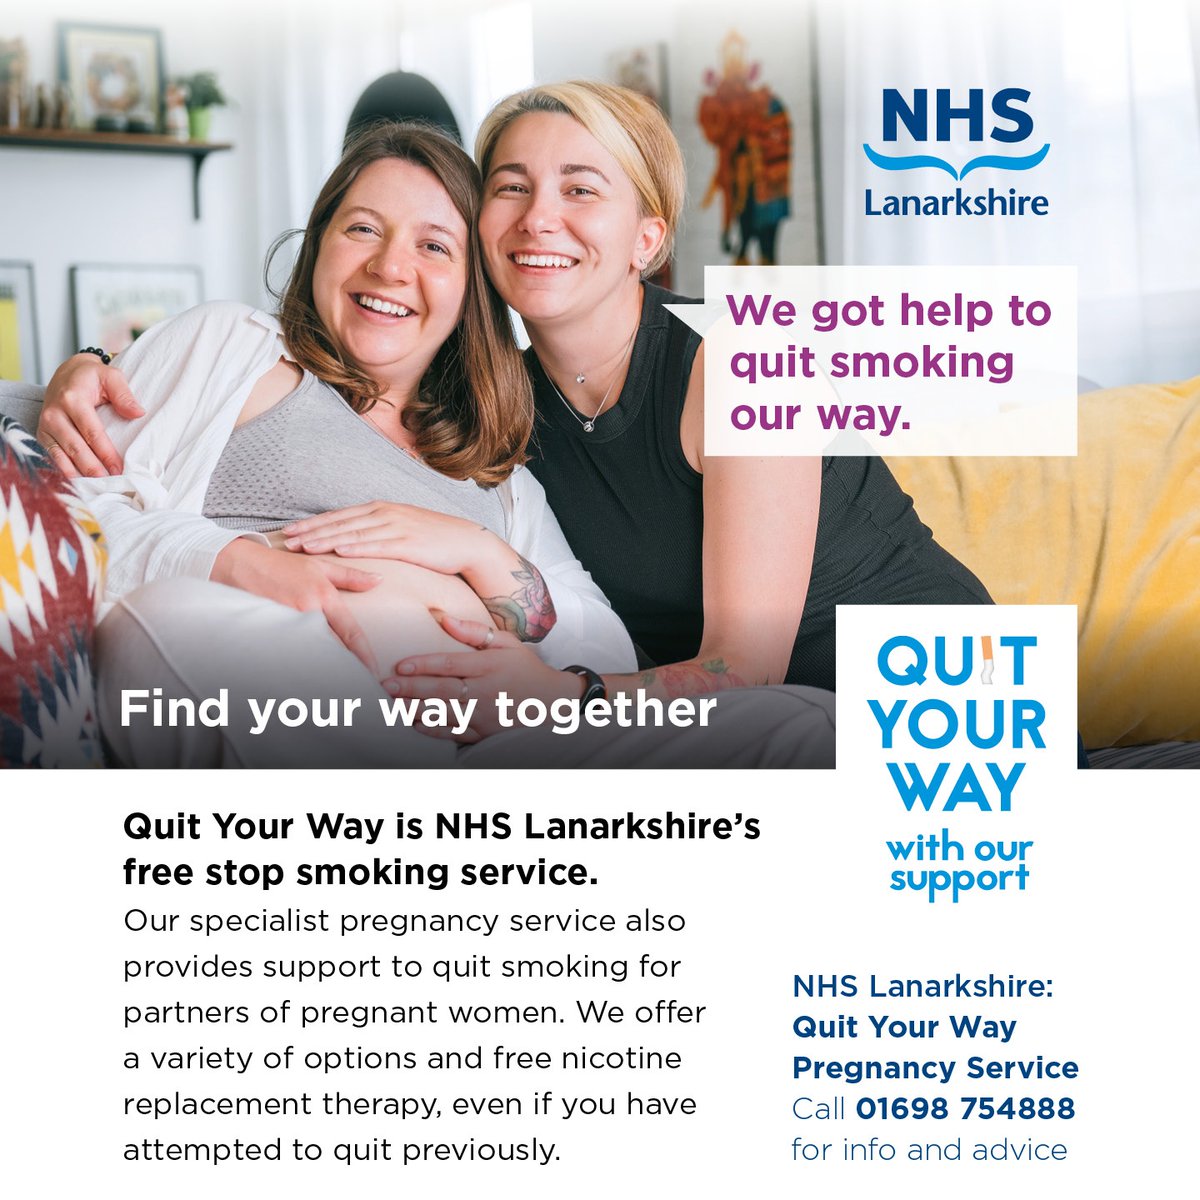 Children are much more likely to smoke themselves if someone in their household smokes. For more information and support to quit smoking call 0800 84 84 84 or visit nhslanarkshire.scot.nhs.uk/services/quit-…